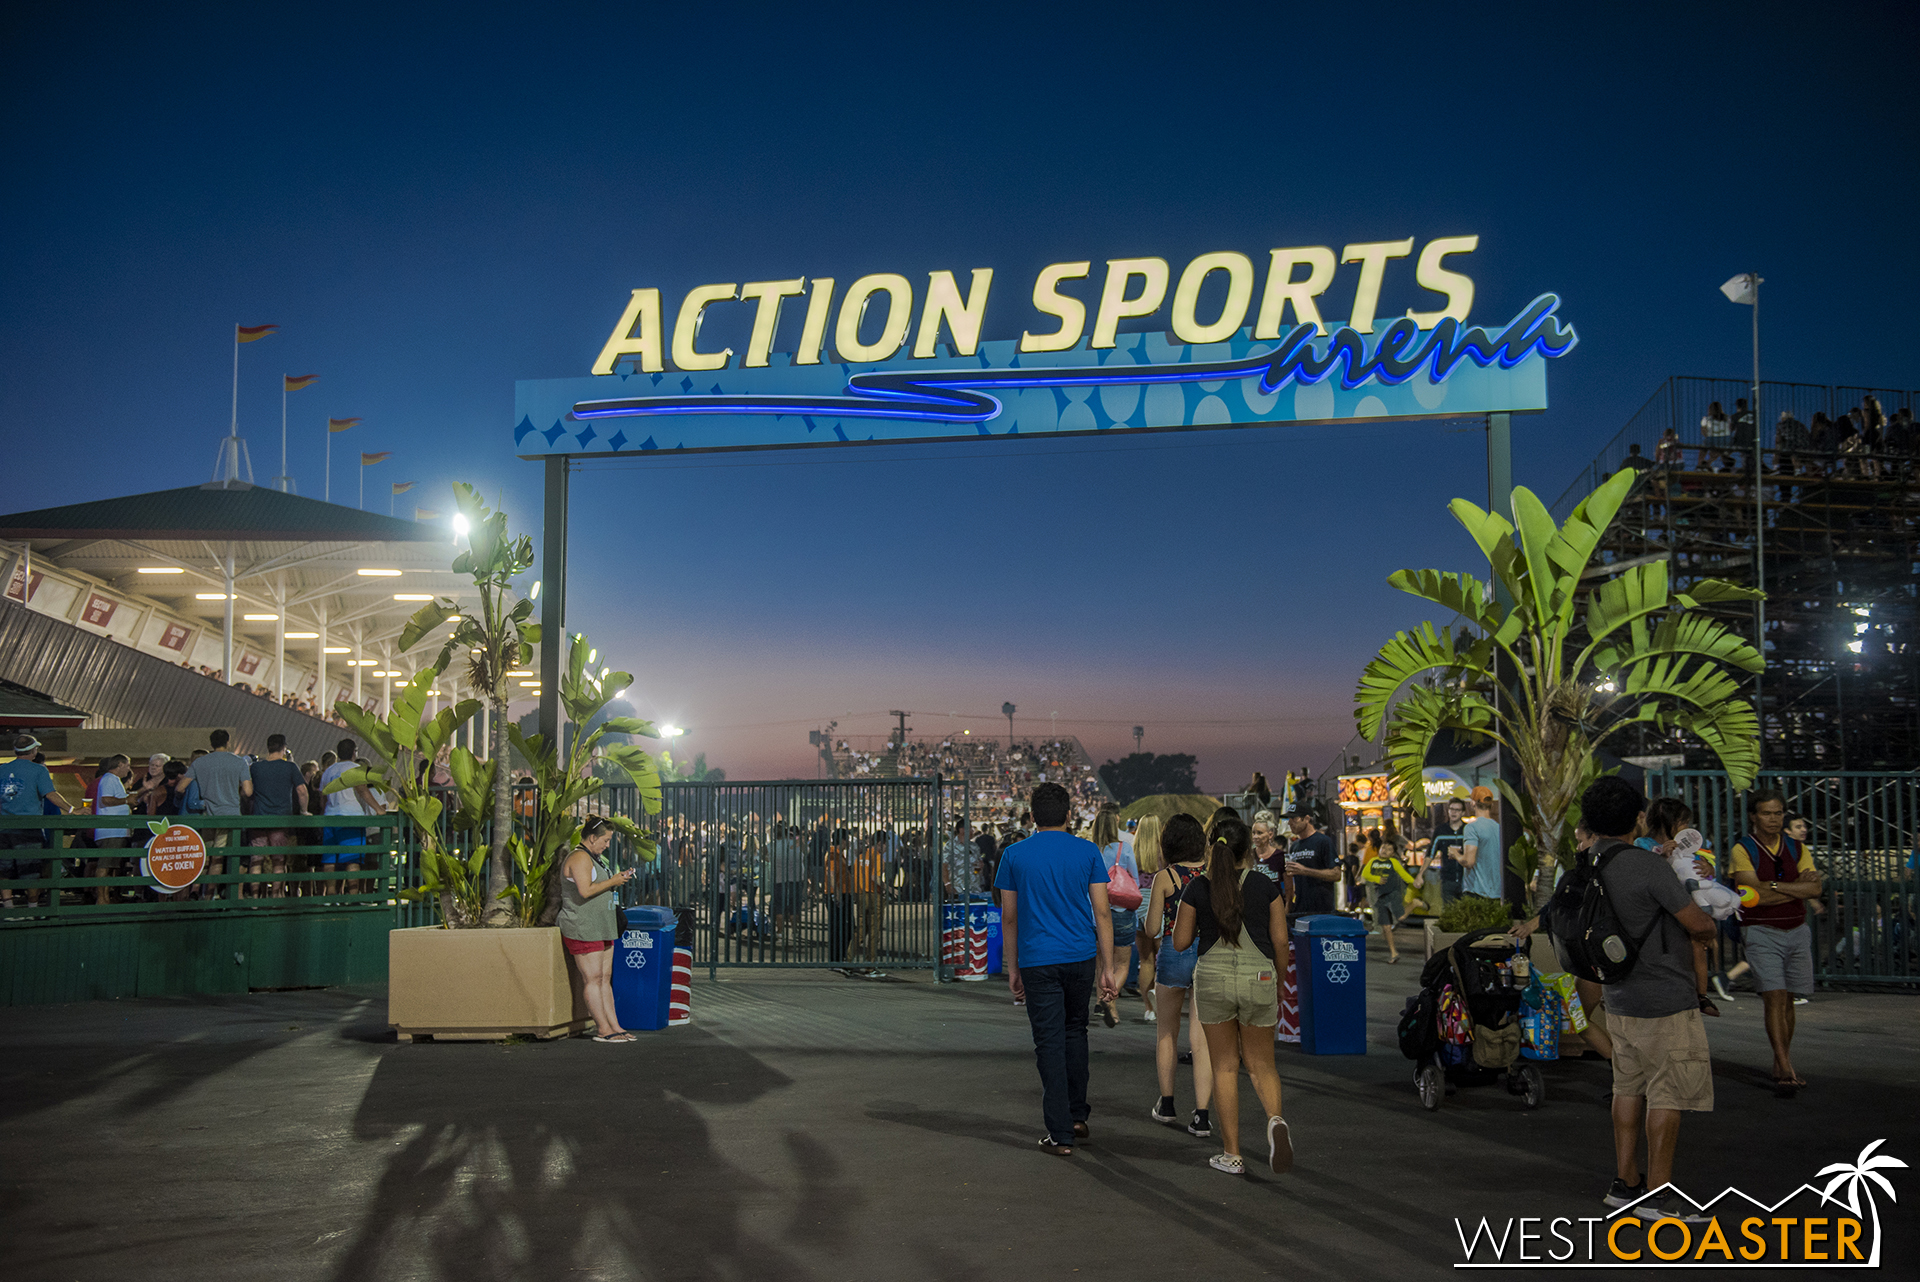  In the Livestock area, the Action Sports Arena also hosts live entertainment in the form of motorcross races, demolition derbies, and other high adrenaline shows. 